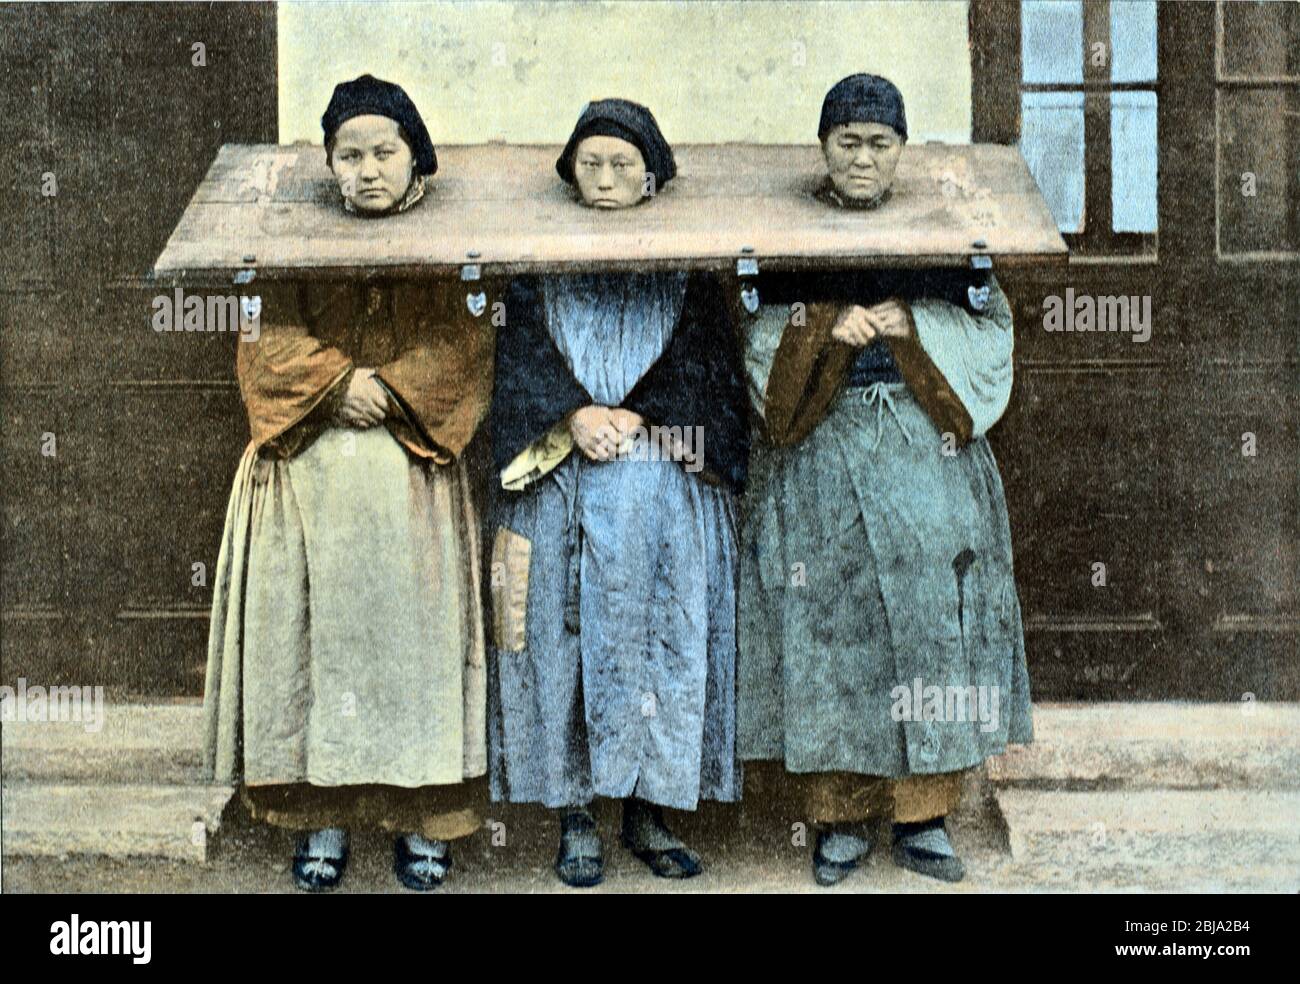 Three Women or Female Vietnamese Prisoners Wearing a Cangue or Tcha, a Form of Neck Yoke or Pillory Used as Punishment or Torture of Prisoners in Vietnam and Elsewhere in Southeast Asia c1890 Stock Photo